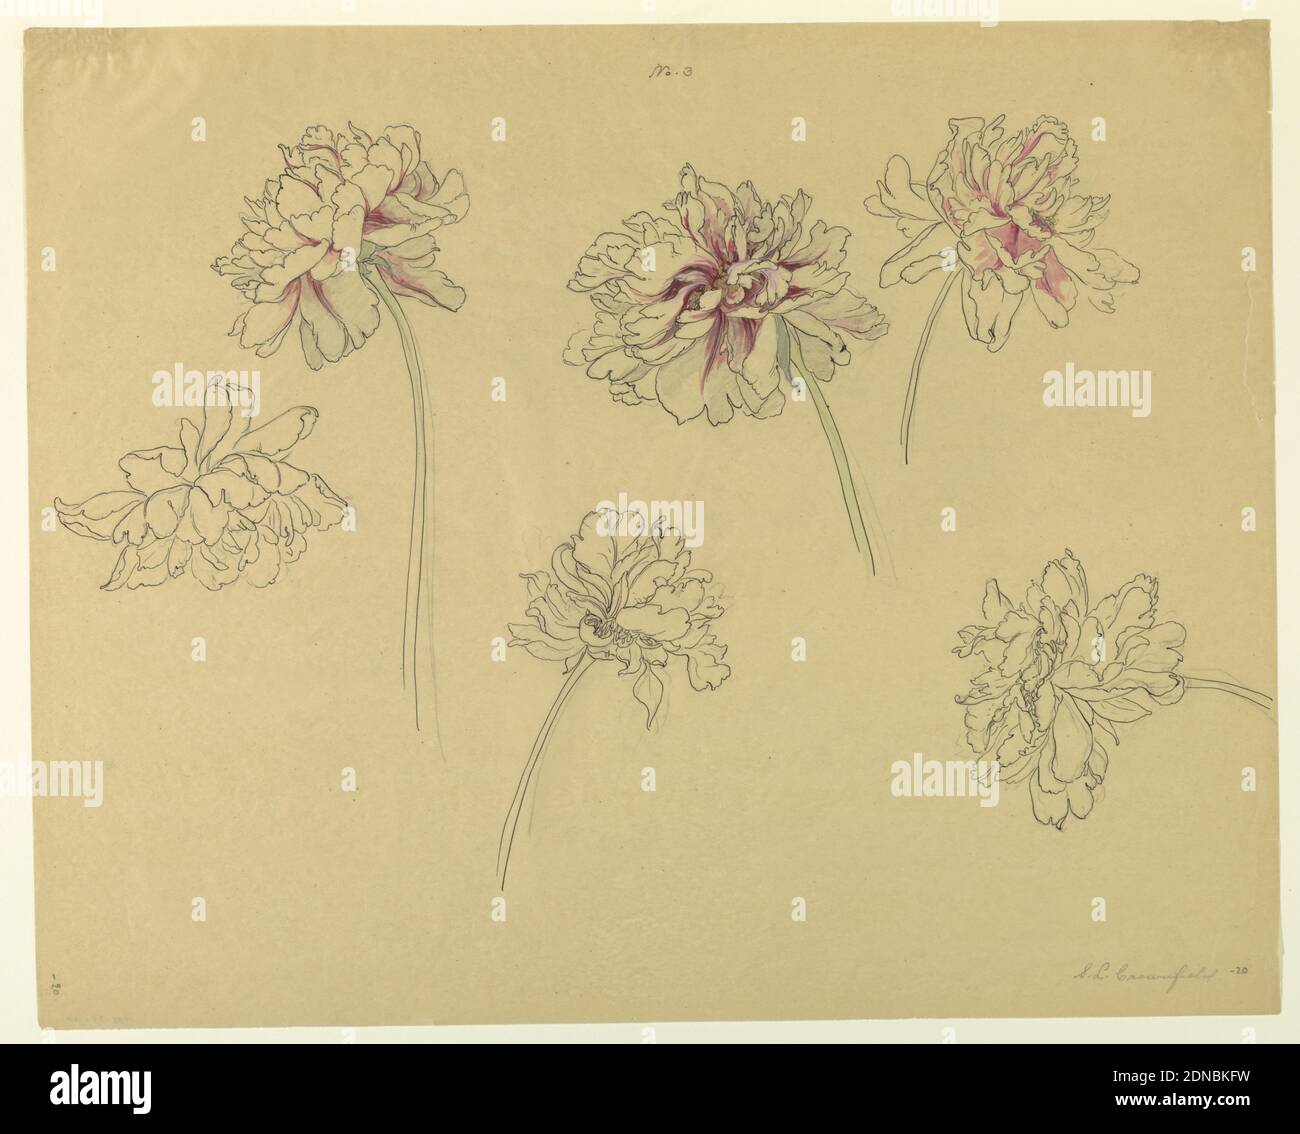 Study of Peonies, Sophia L. Crownfield, (American, 1862–1929), Pen and ink, graphite, brush and watercolor on tracing paper, Horizontal sheet depicting studies of peonies in graphite, some with gouache coloring on petals., USA, early 20th century, nature studies, Drawing Stock Photo